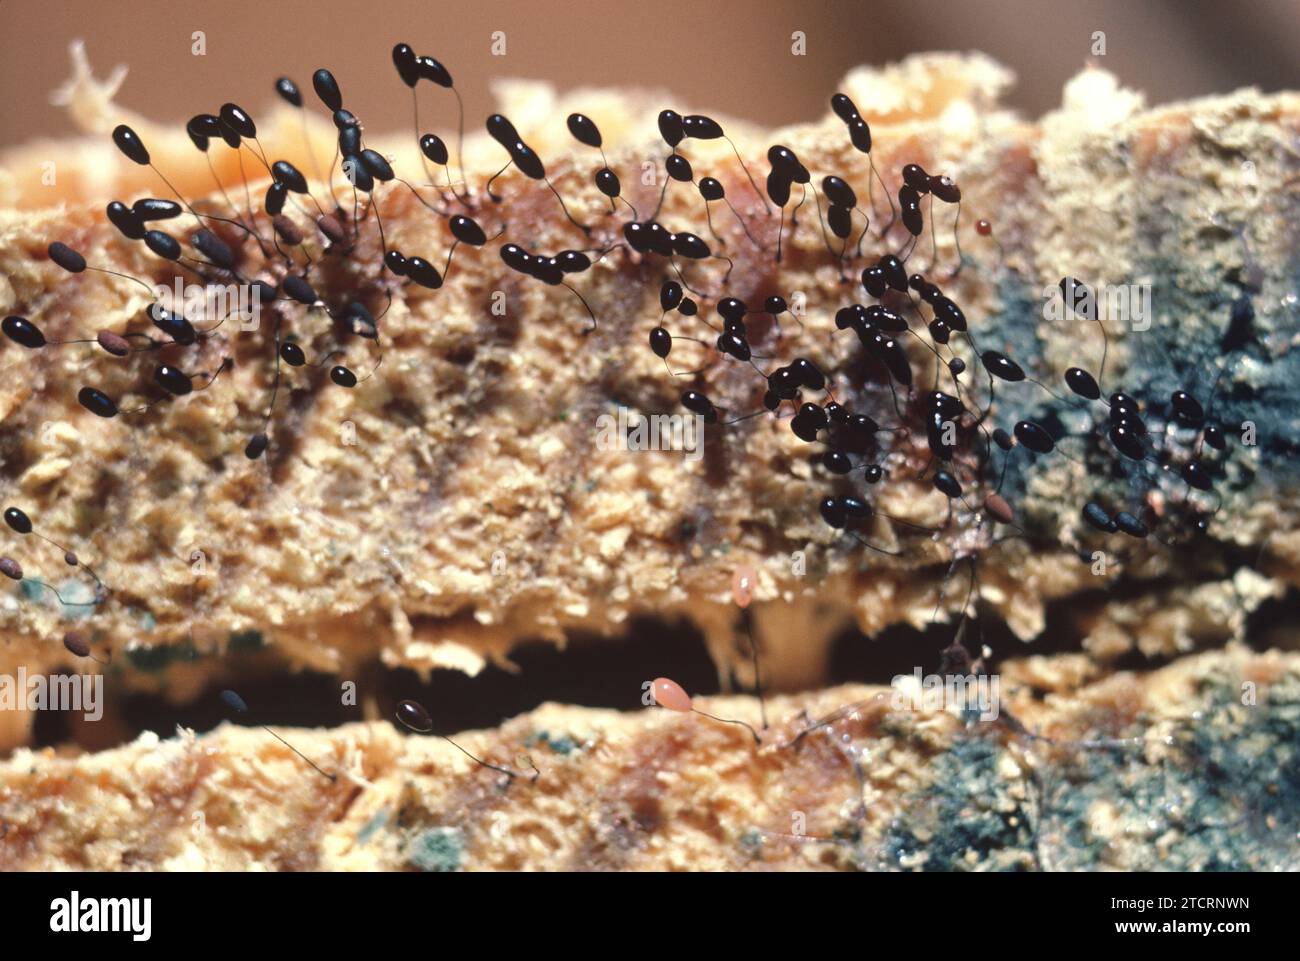 Mold or mould sporangia colonizing wood. Stock Photo